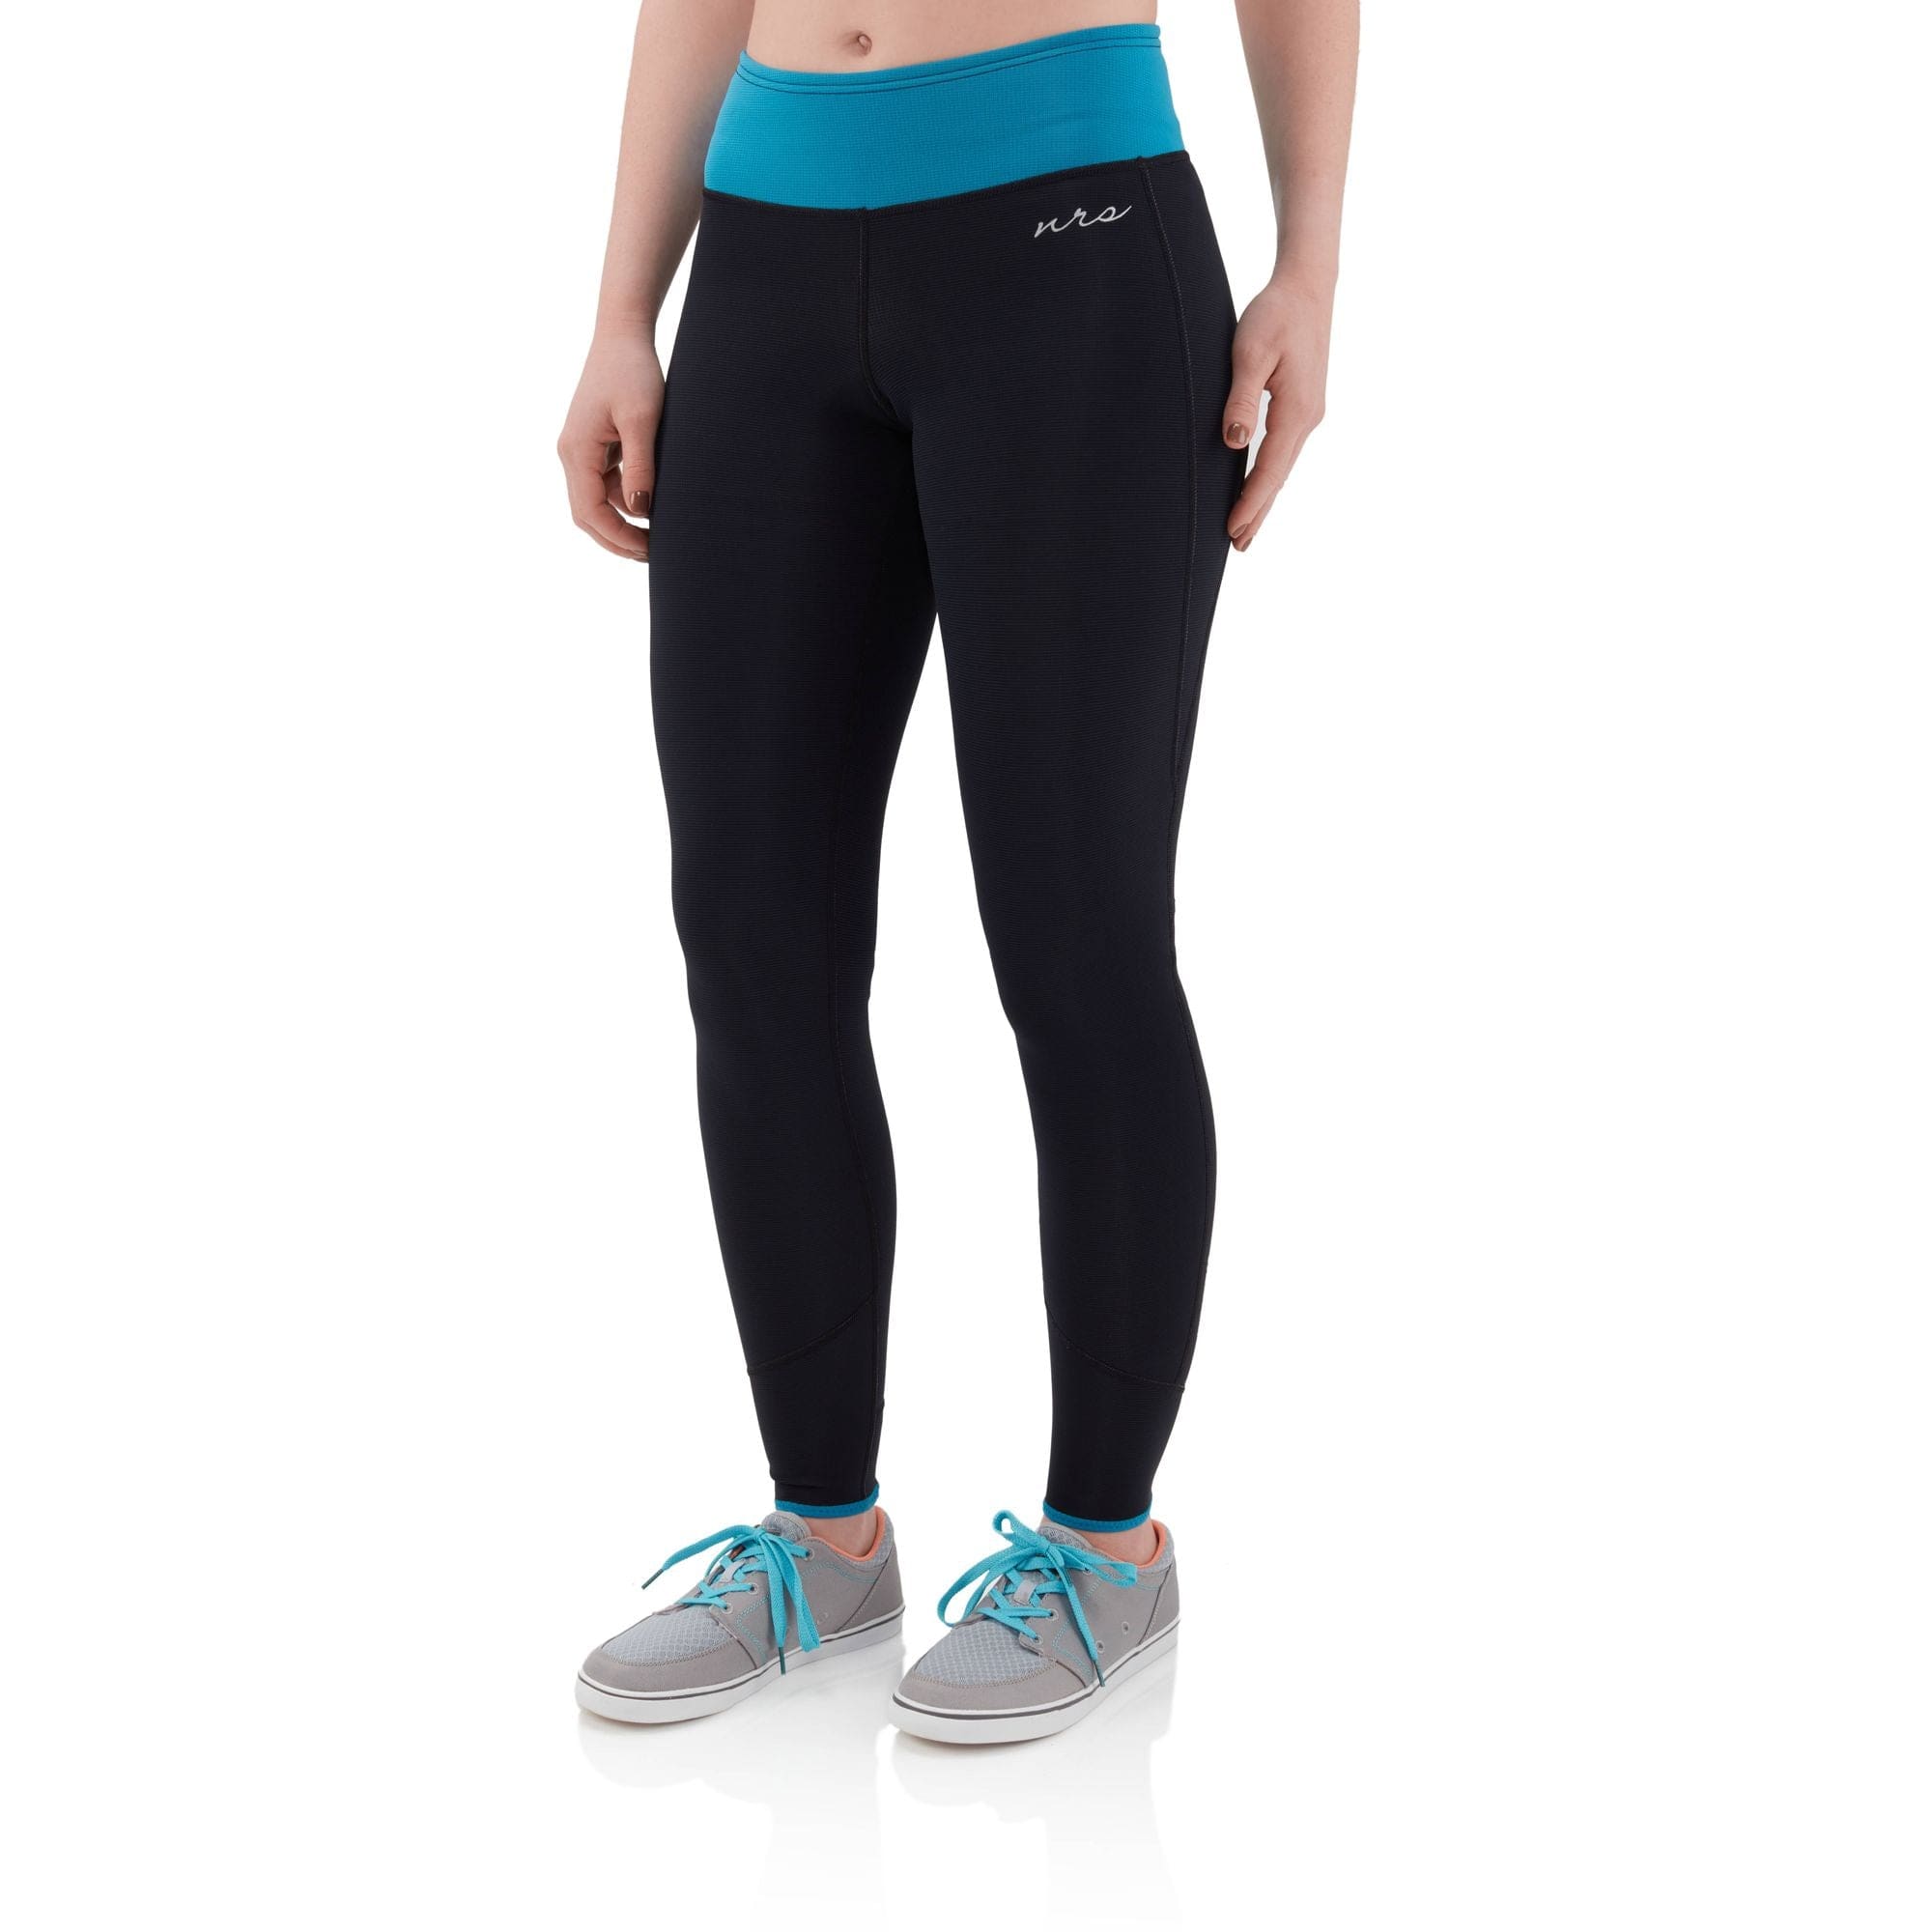 2023 NRS Women's HydroSkin 1.5 Pant Closeout